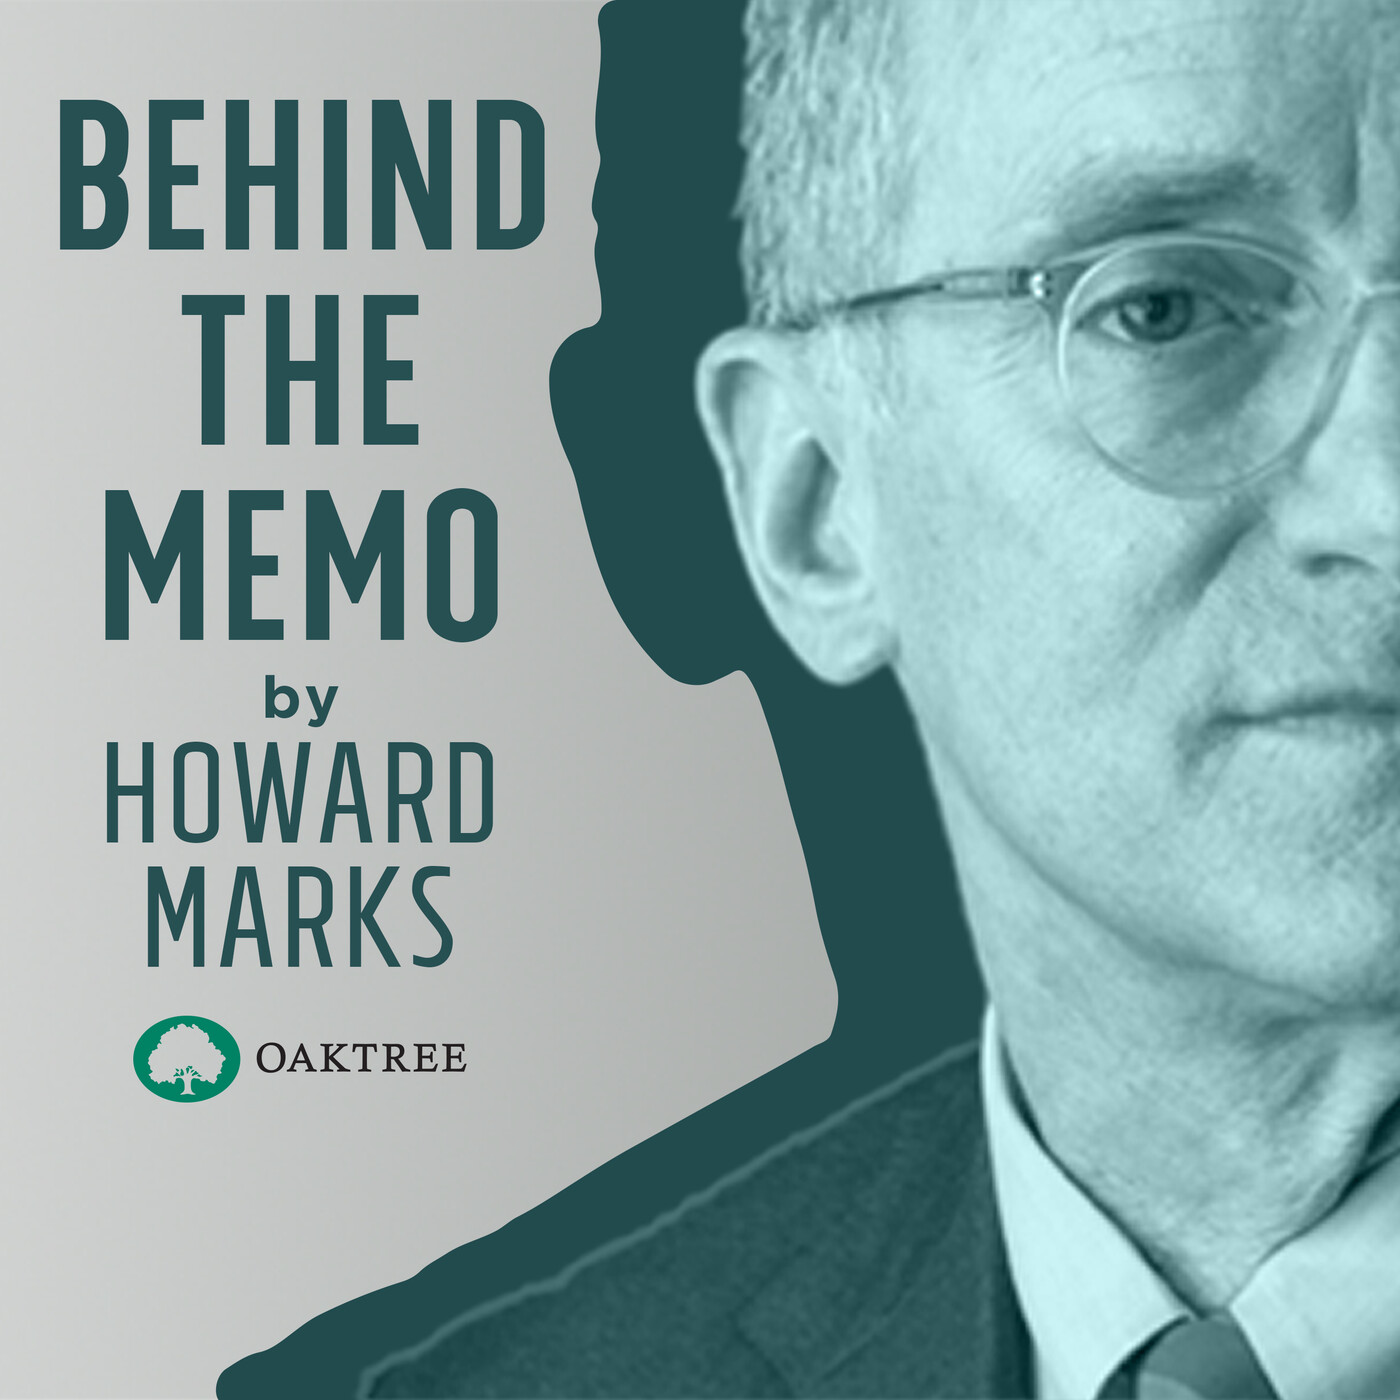 Introducing "Behind The Memo": Selling Out